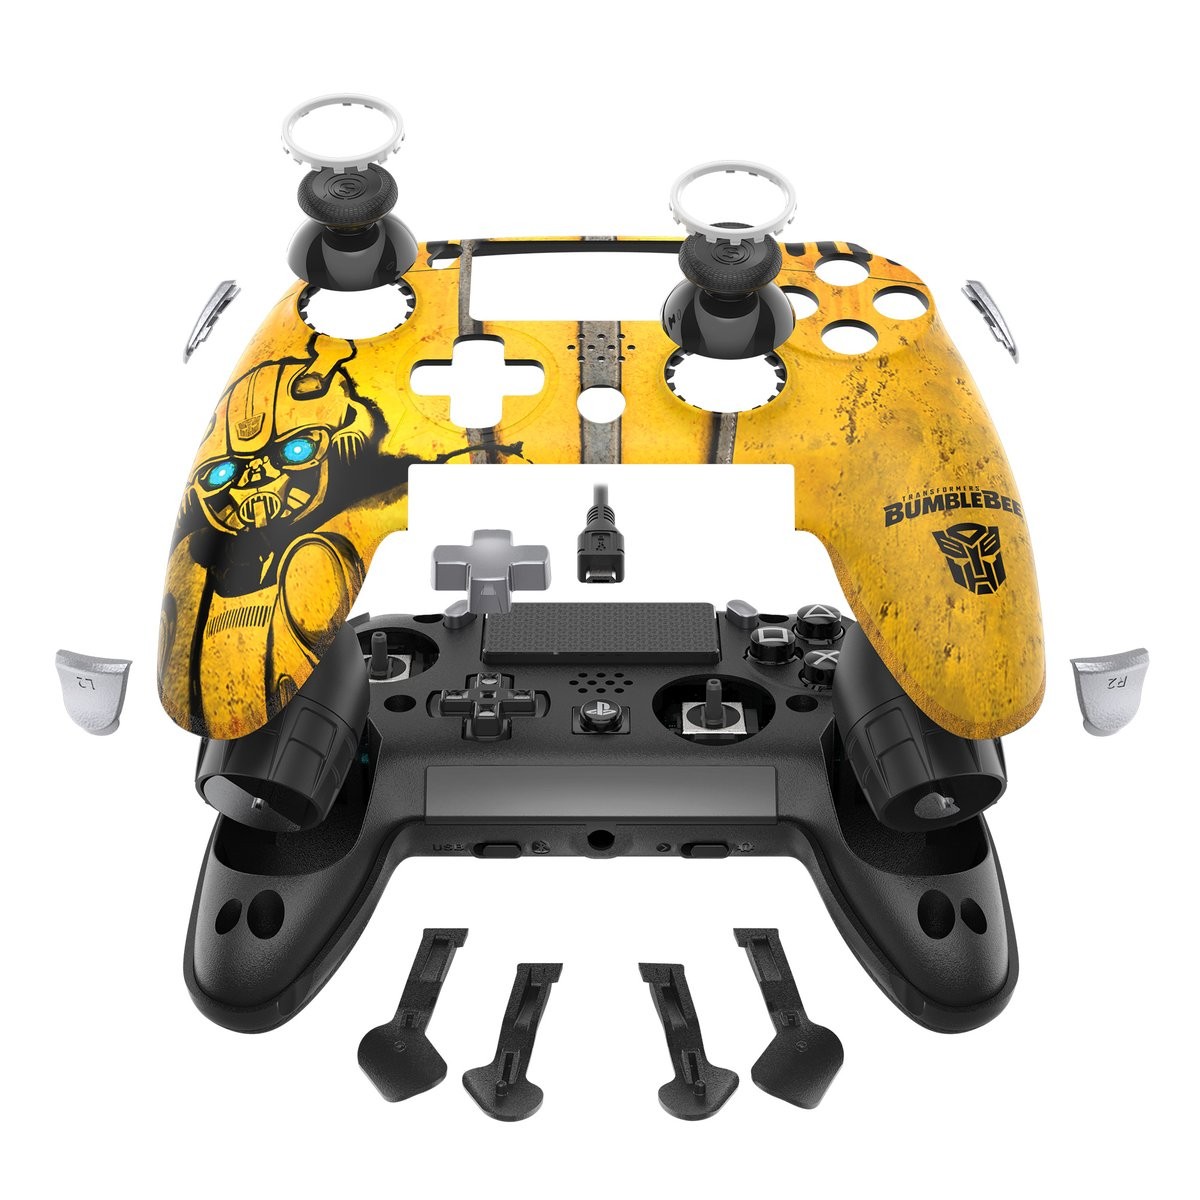 Transformers News: Bumblebee Edition SCUF Vantage Play Station 4 Controller Revealed